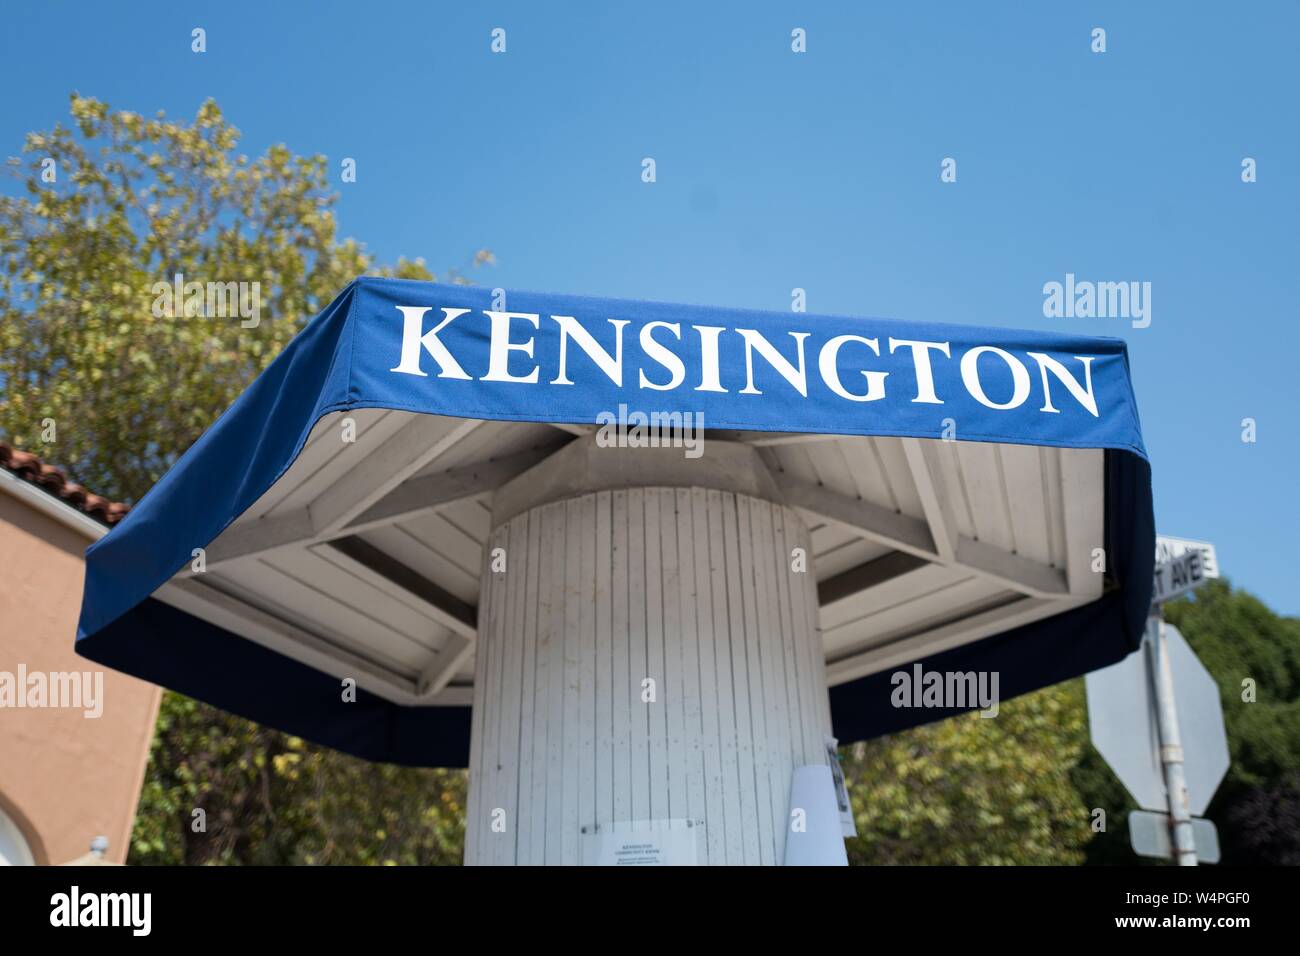 Town message board with shaded top reading Kensington in a public square in Kensington, California, a small town in the San Francisco Bay Area, September 4, 2018. () Stock Photo